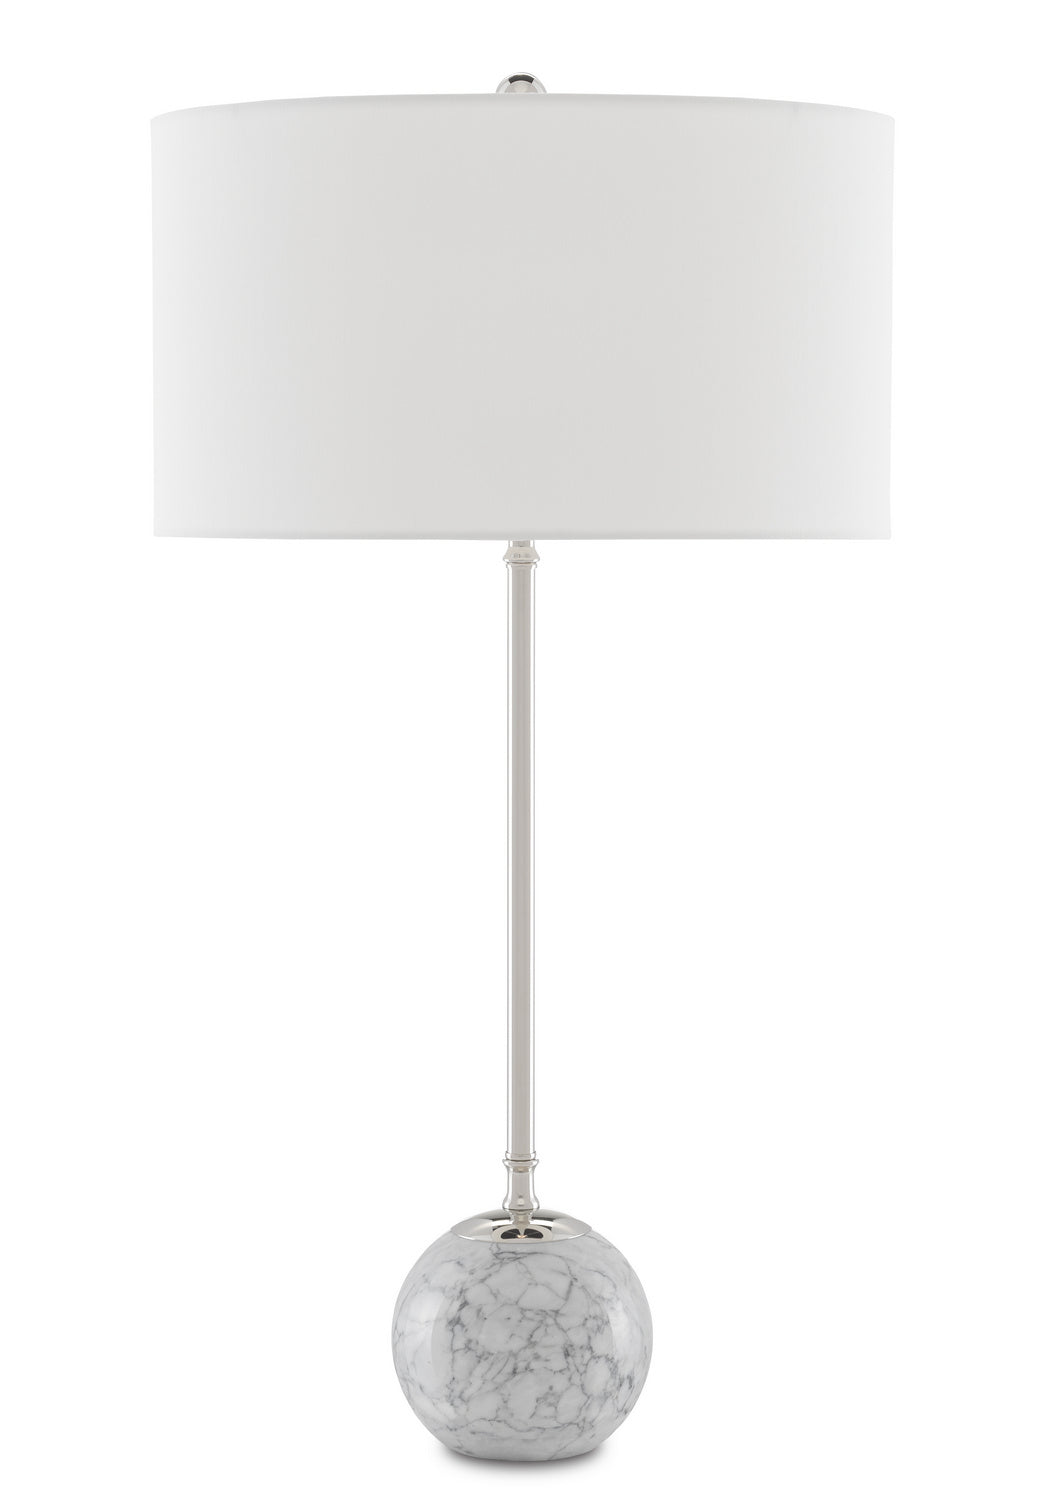 One Light Table Lamp from the Villette collection in Gray & White Veined Marble/Polished Nickel finish